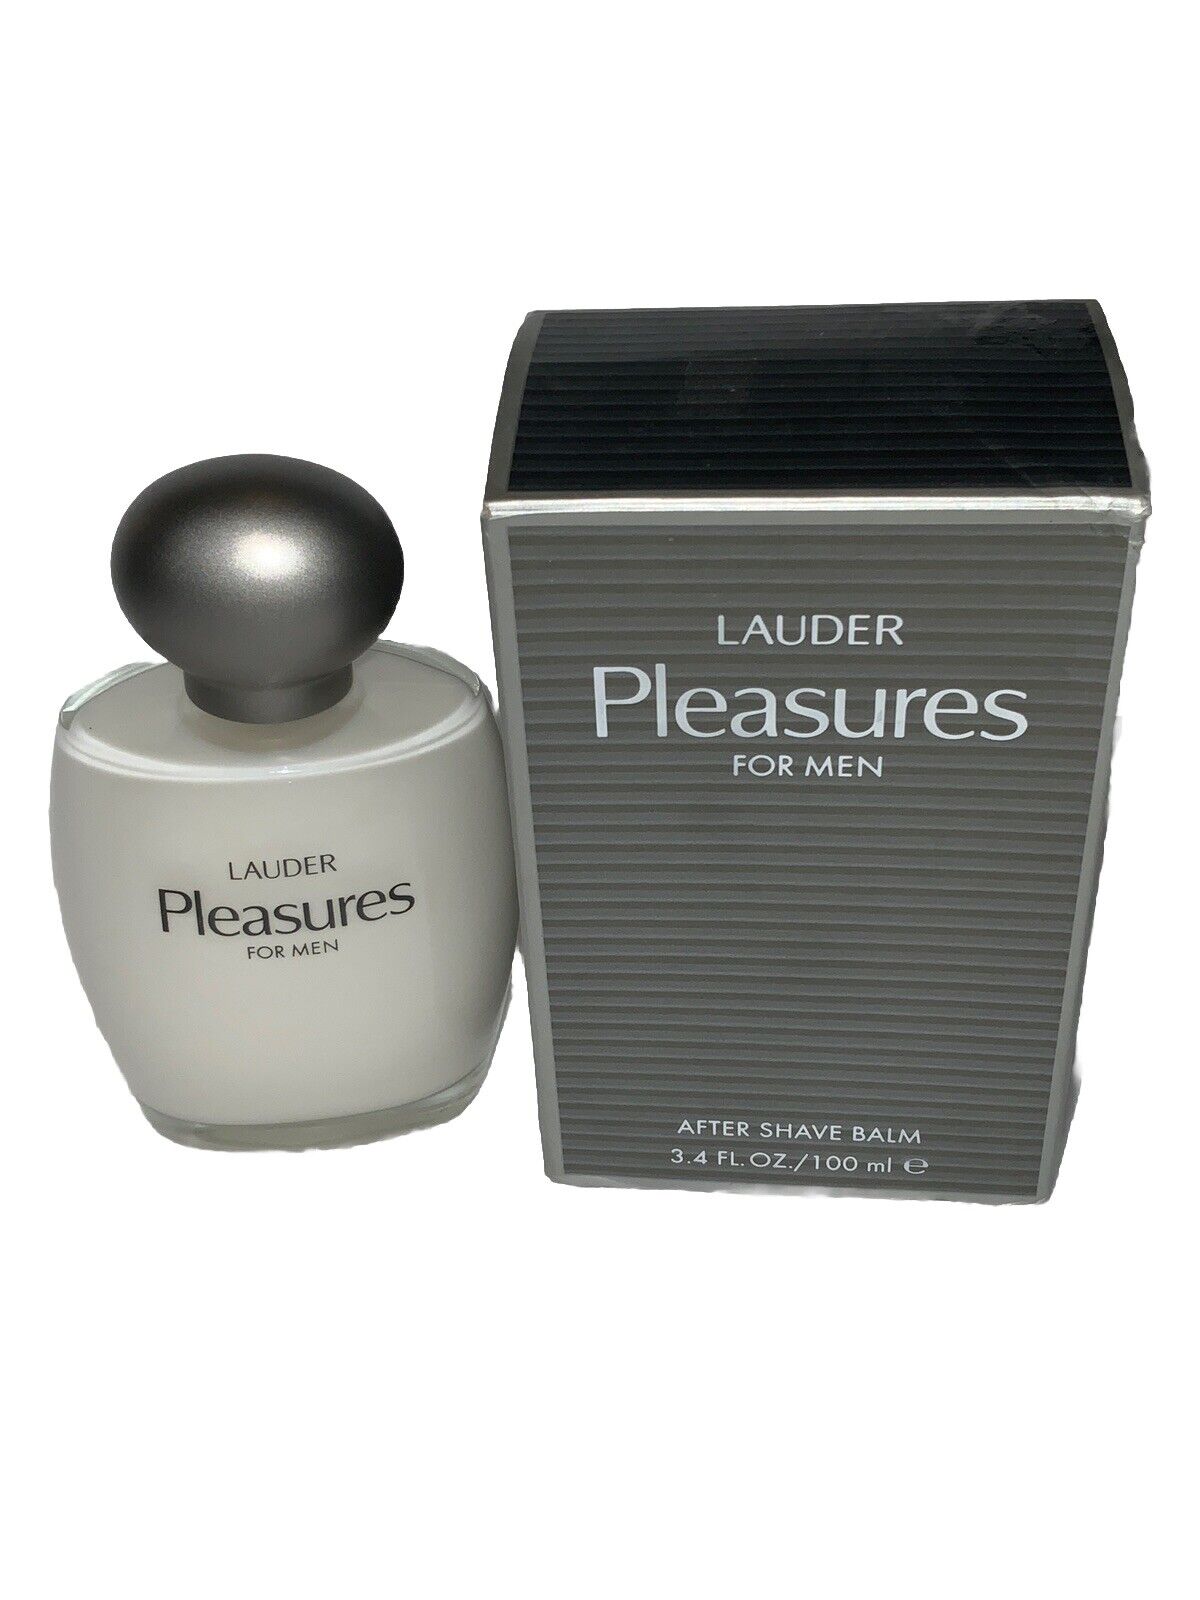 Very RARE Estee Lauder Pleasures For Men After Shave Balm 3.4 fl oz NEW WITH BOX